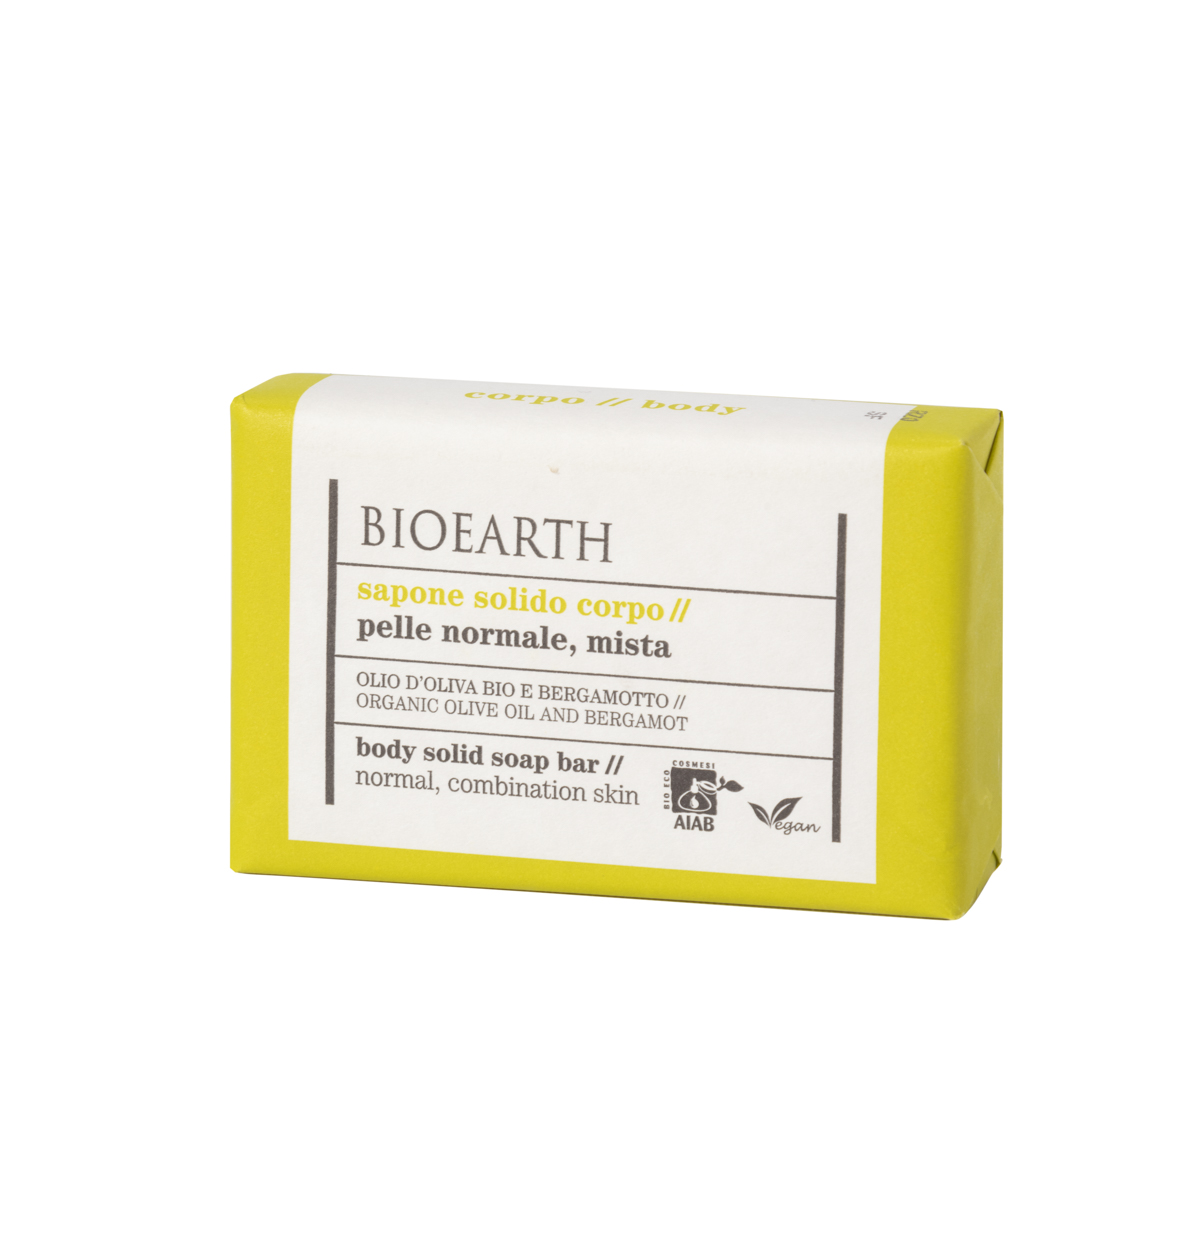 Bioearth - Solid SoapsBody Solid Soap - Organic Olive Oil And Bergamot - 150g